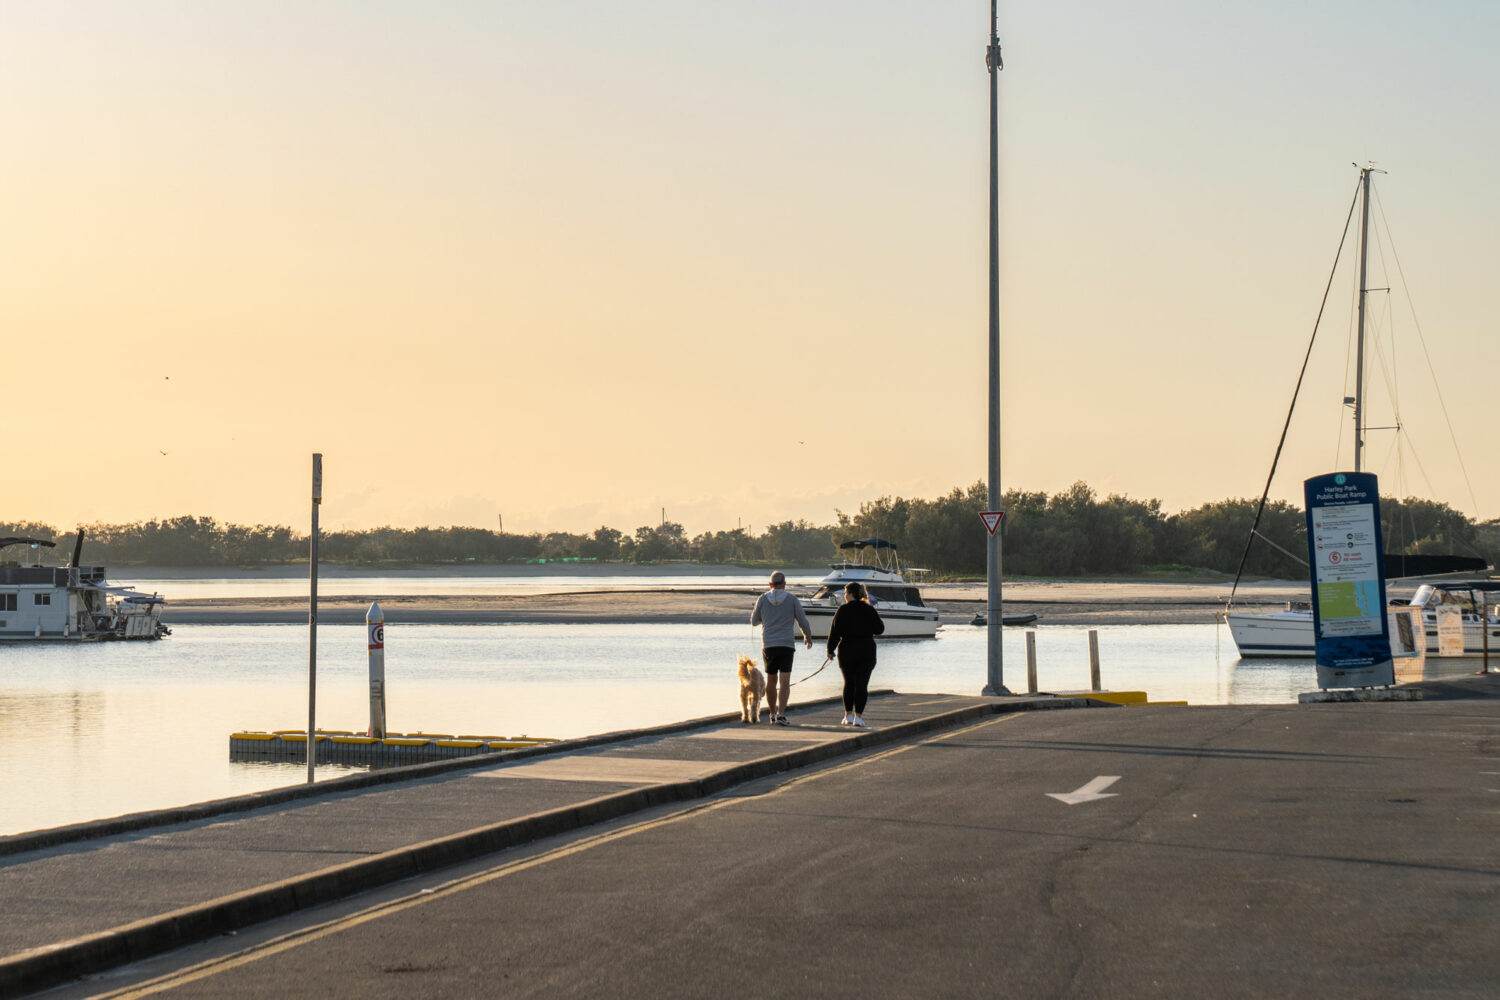 Two people by the Broadwater with a pet near the PARK SHORE development in Labrador on the Gold Coast